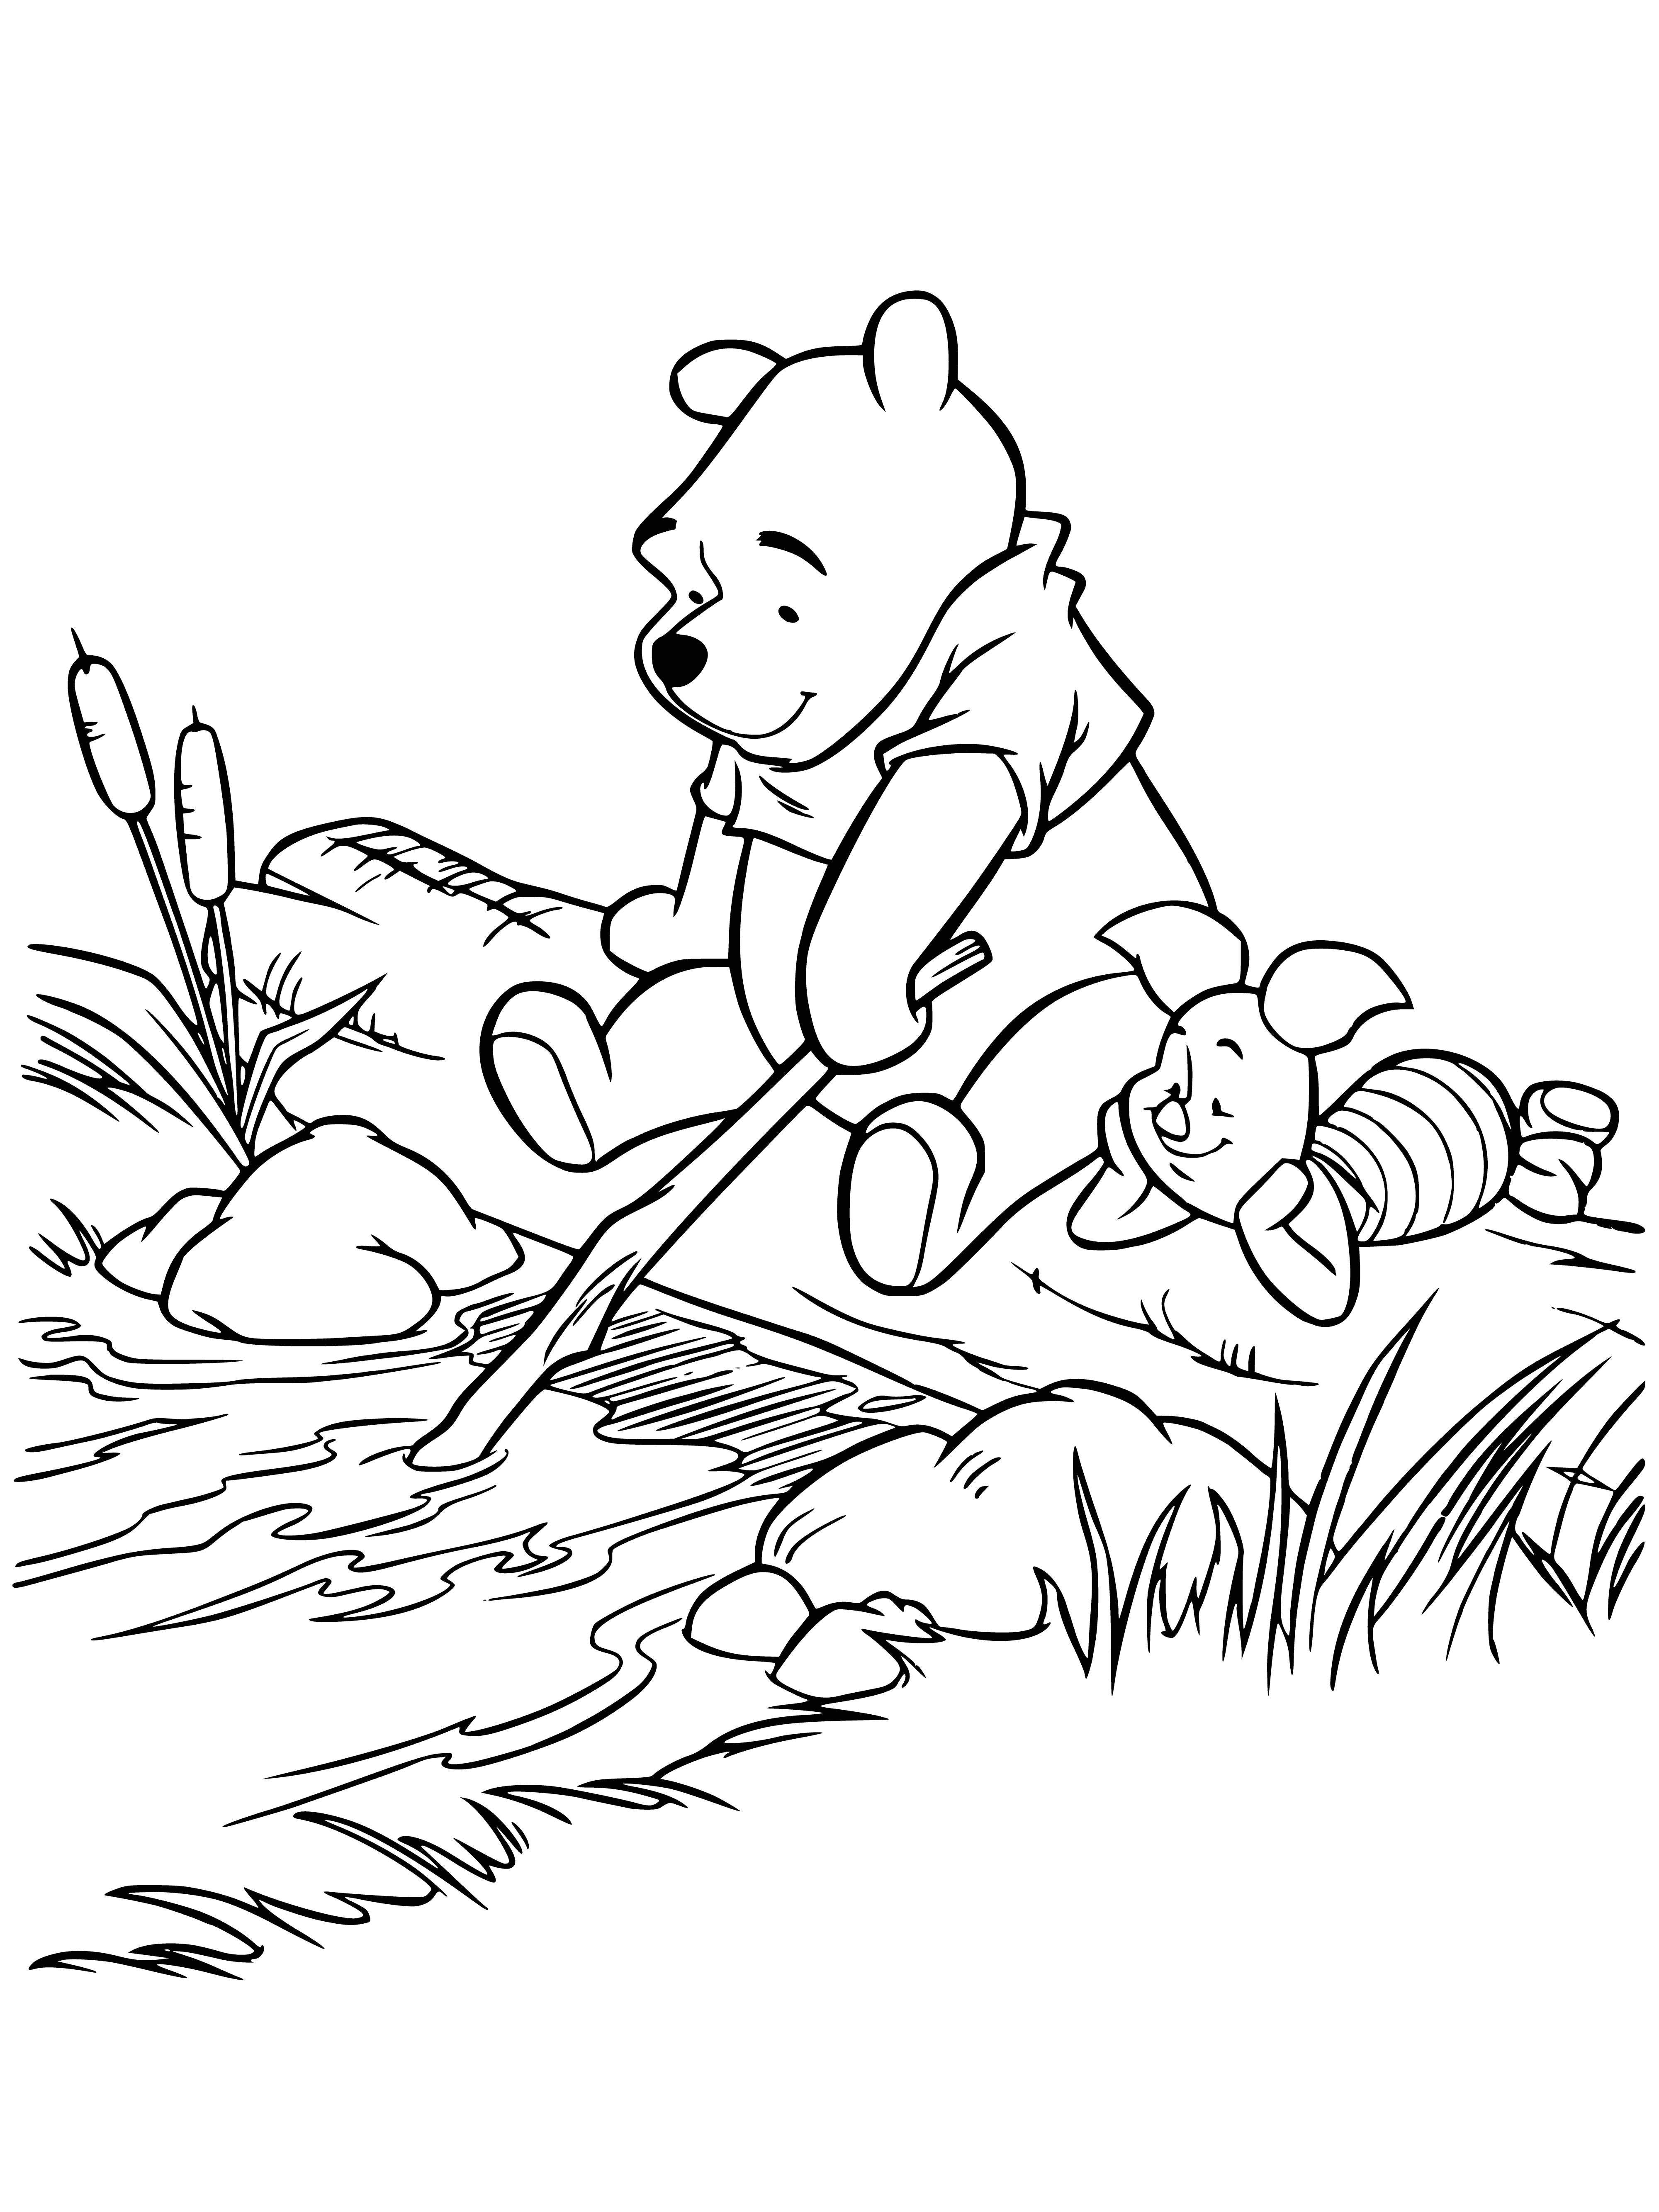 By the river coloring page